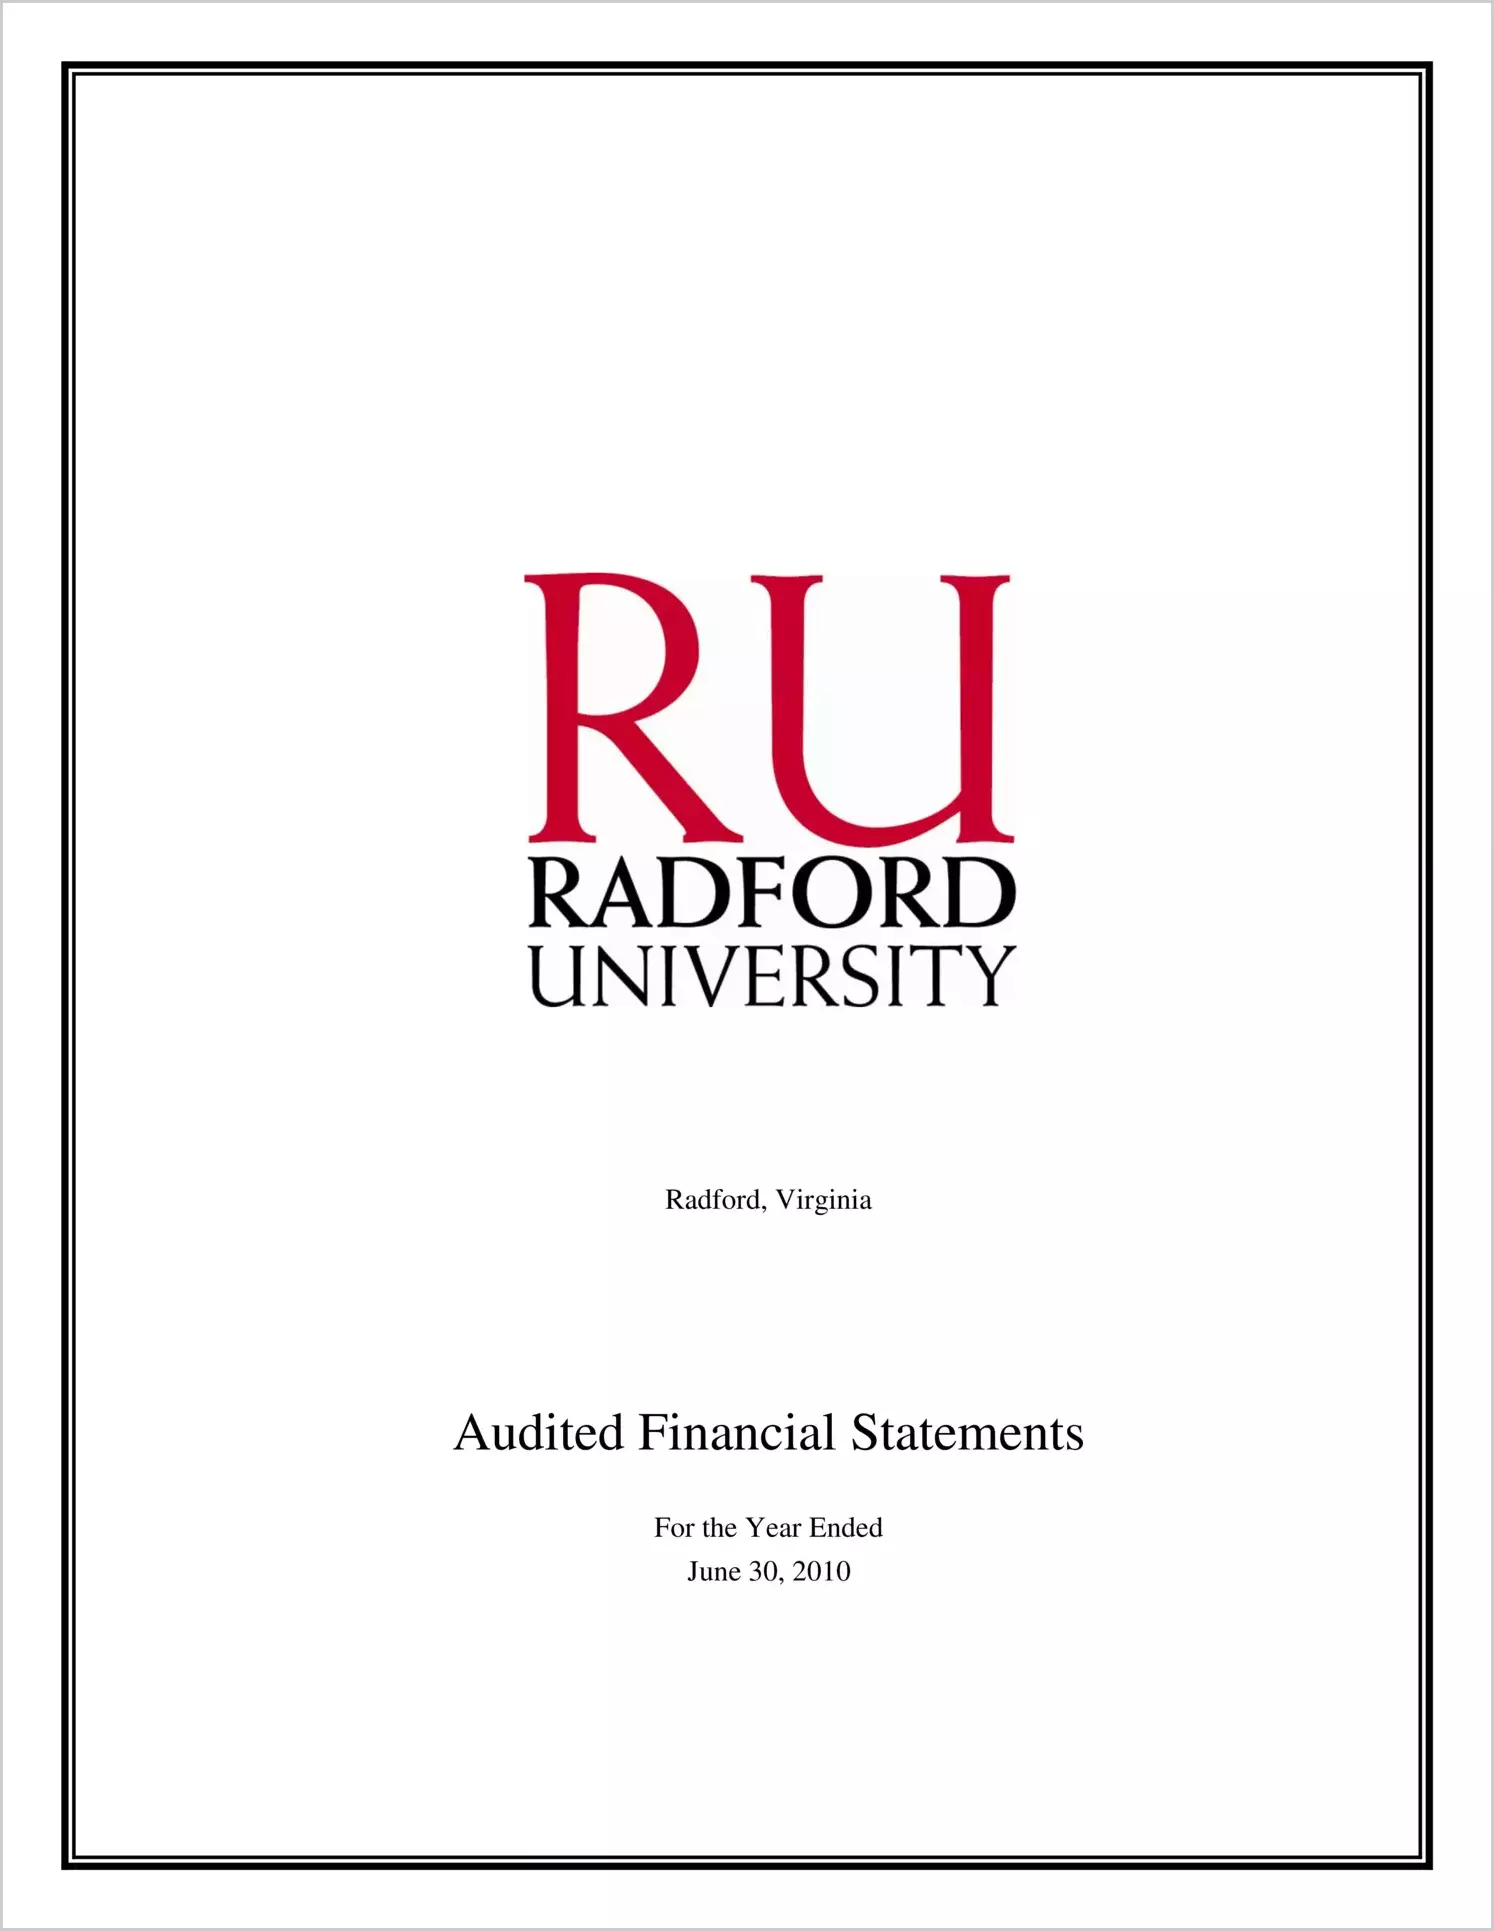 Radford University Financial Statements report on audit for year ending June 30, 2010